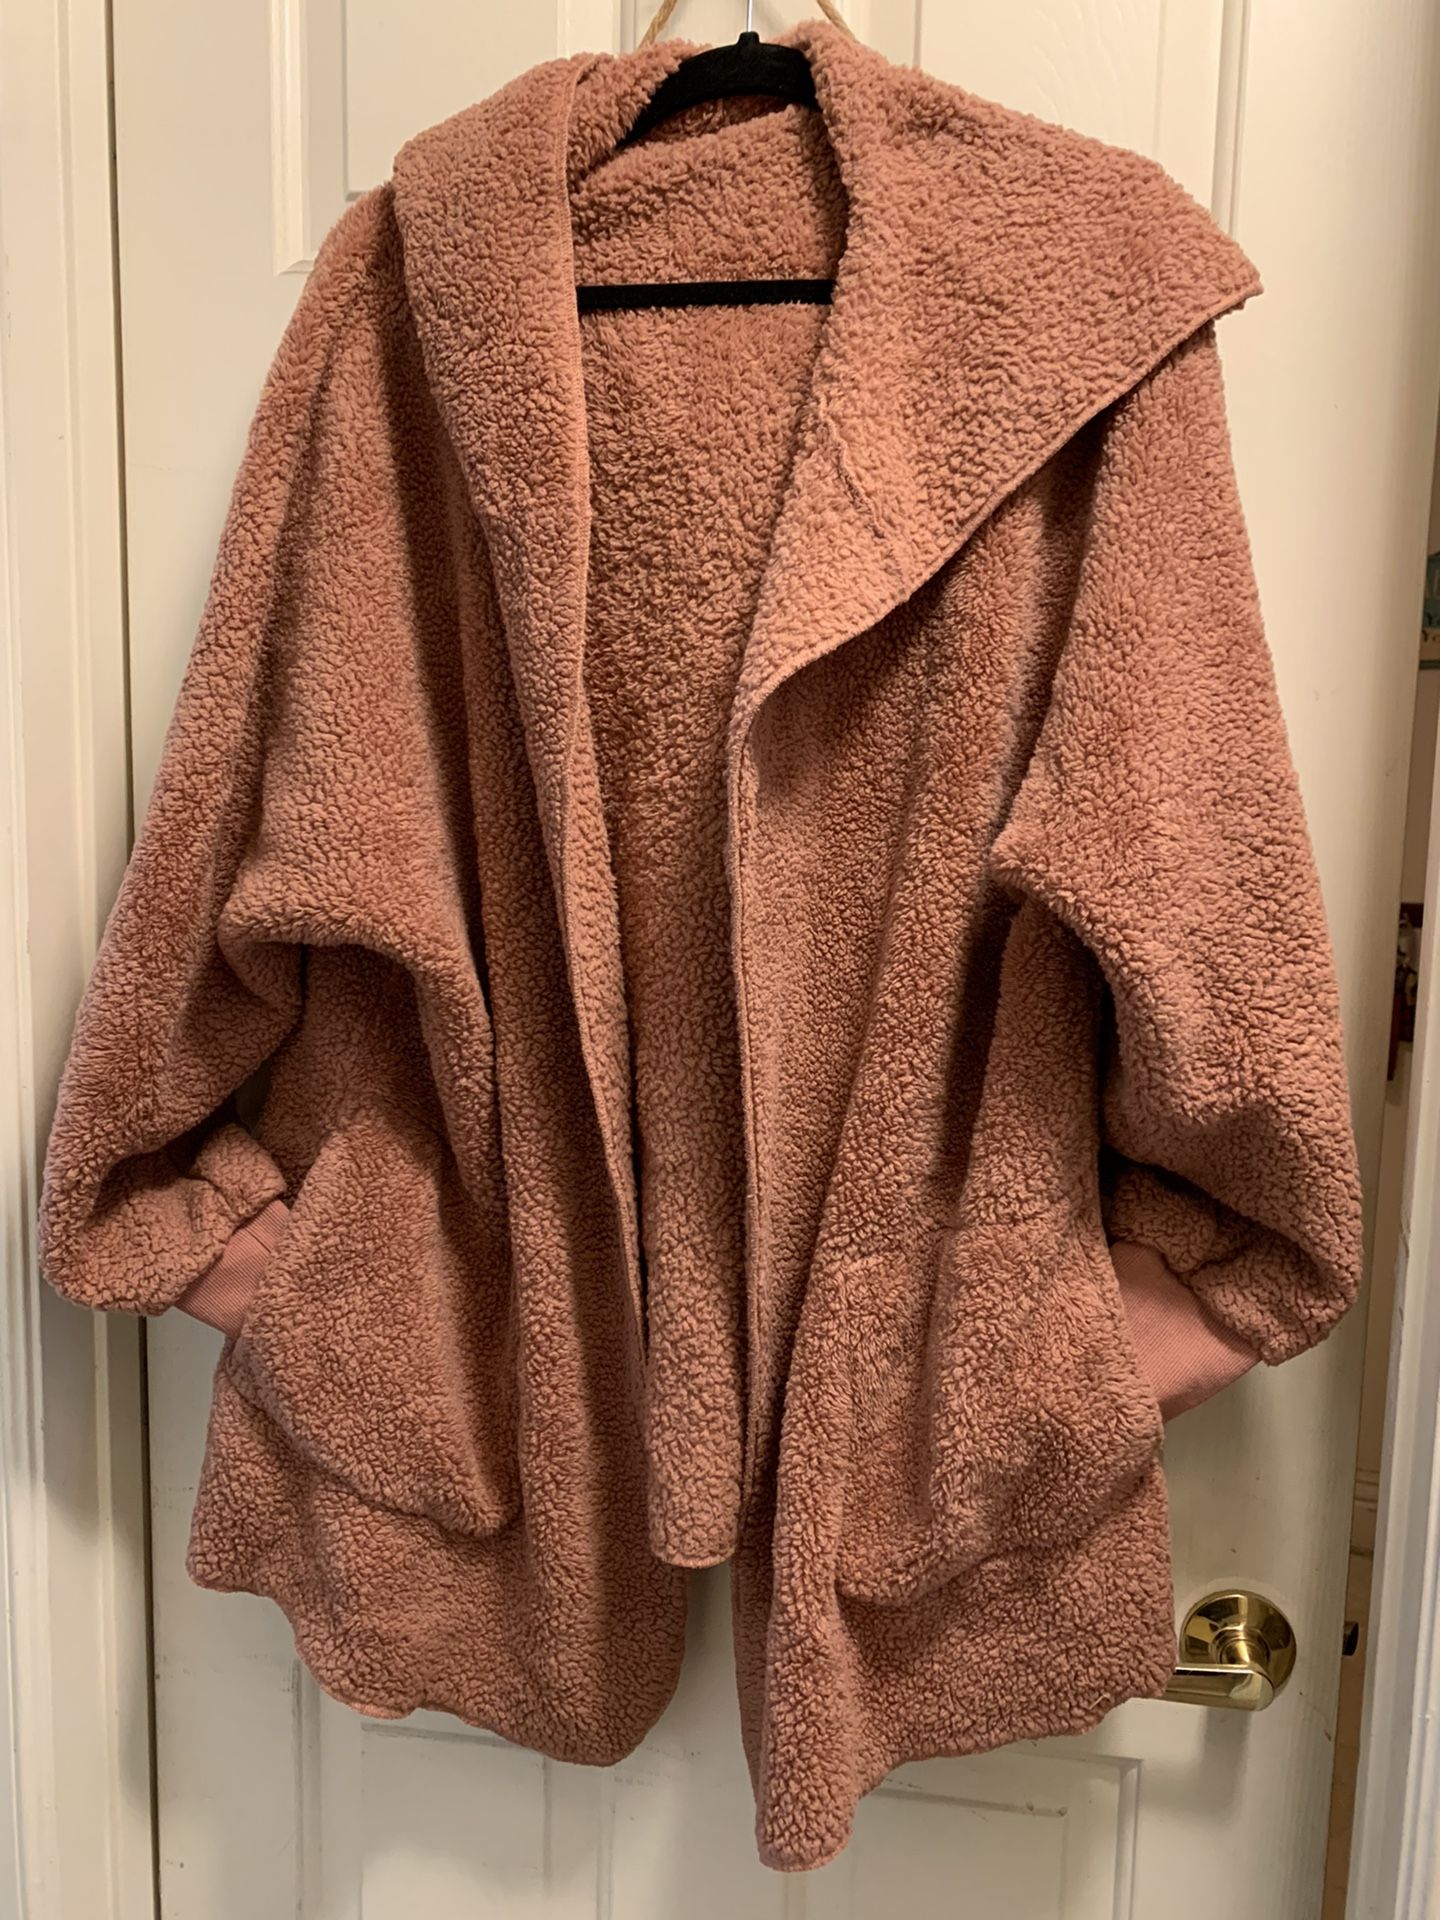 Brown Fleece Jacket With Pockets  - Size XL